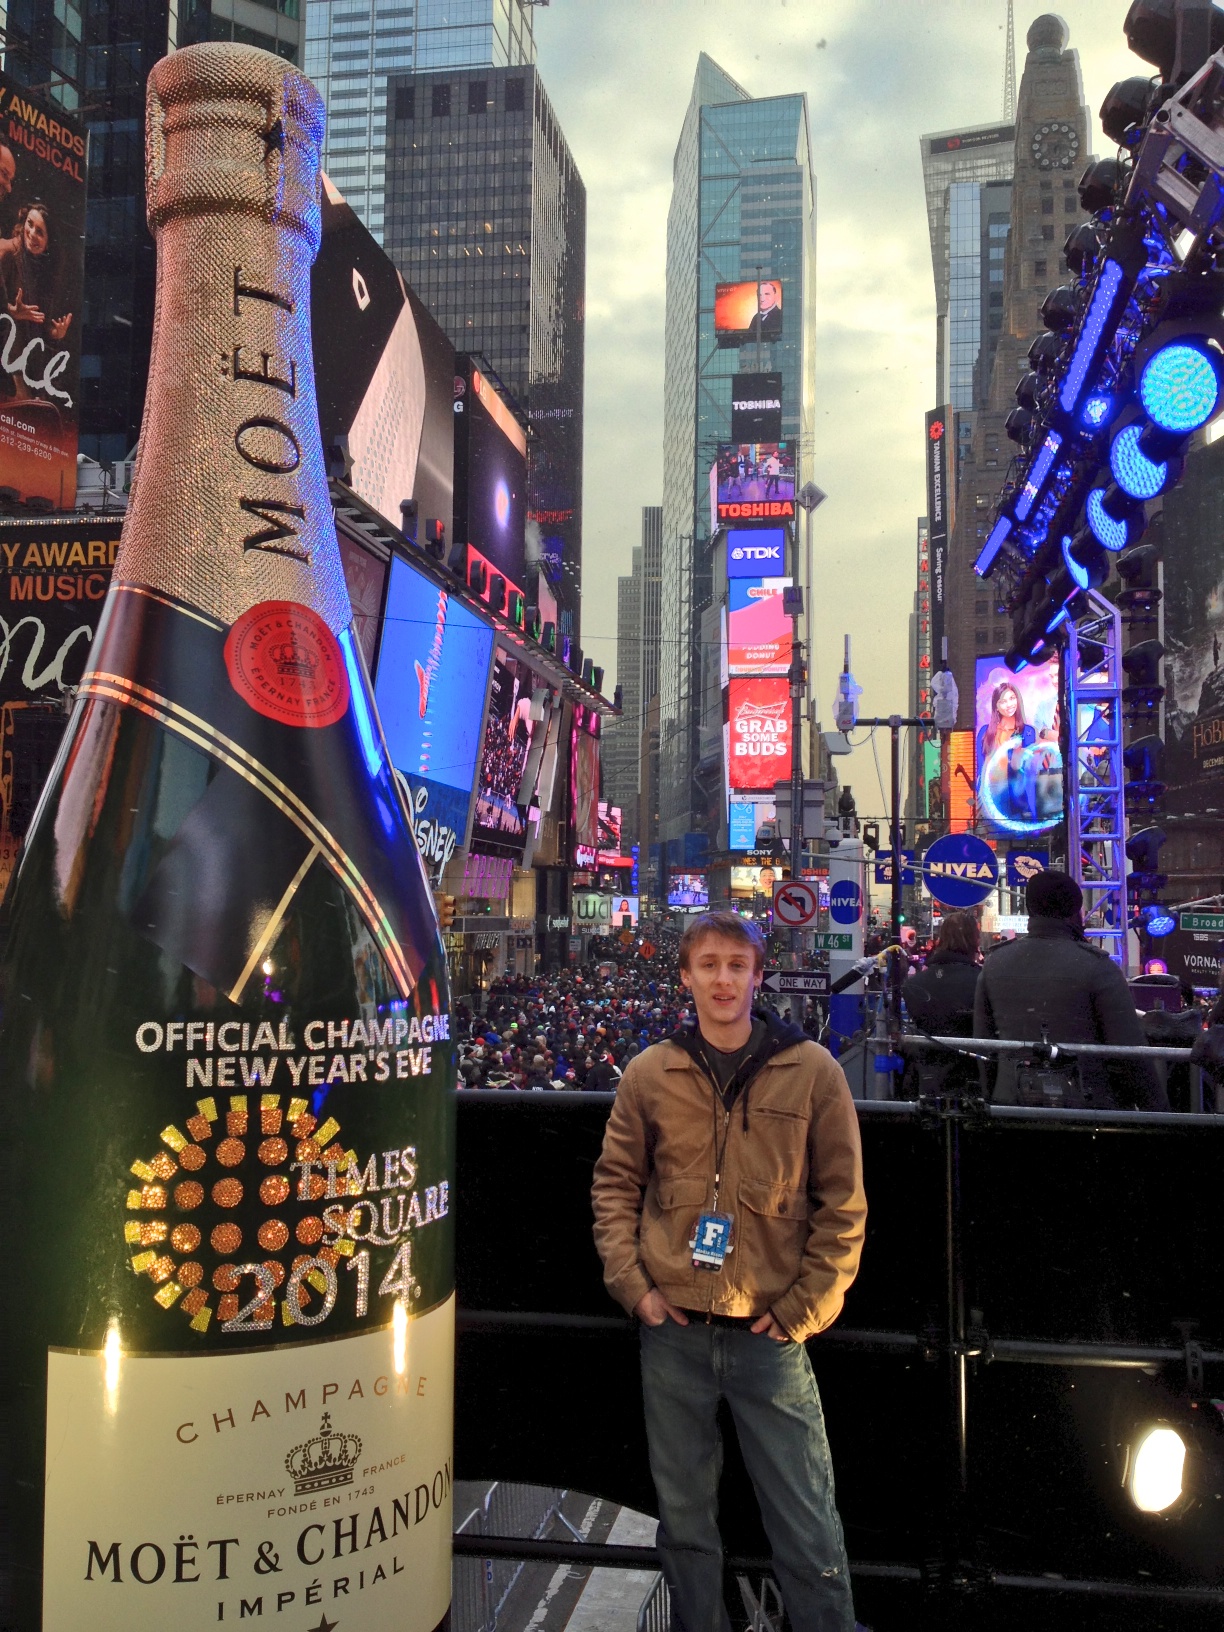  New Year's Eve Ball Drop in Times Sqquare. 